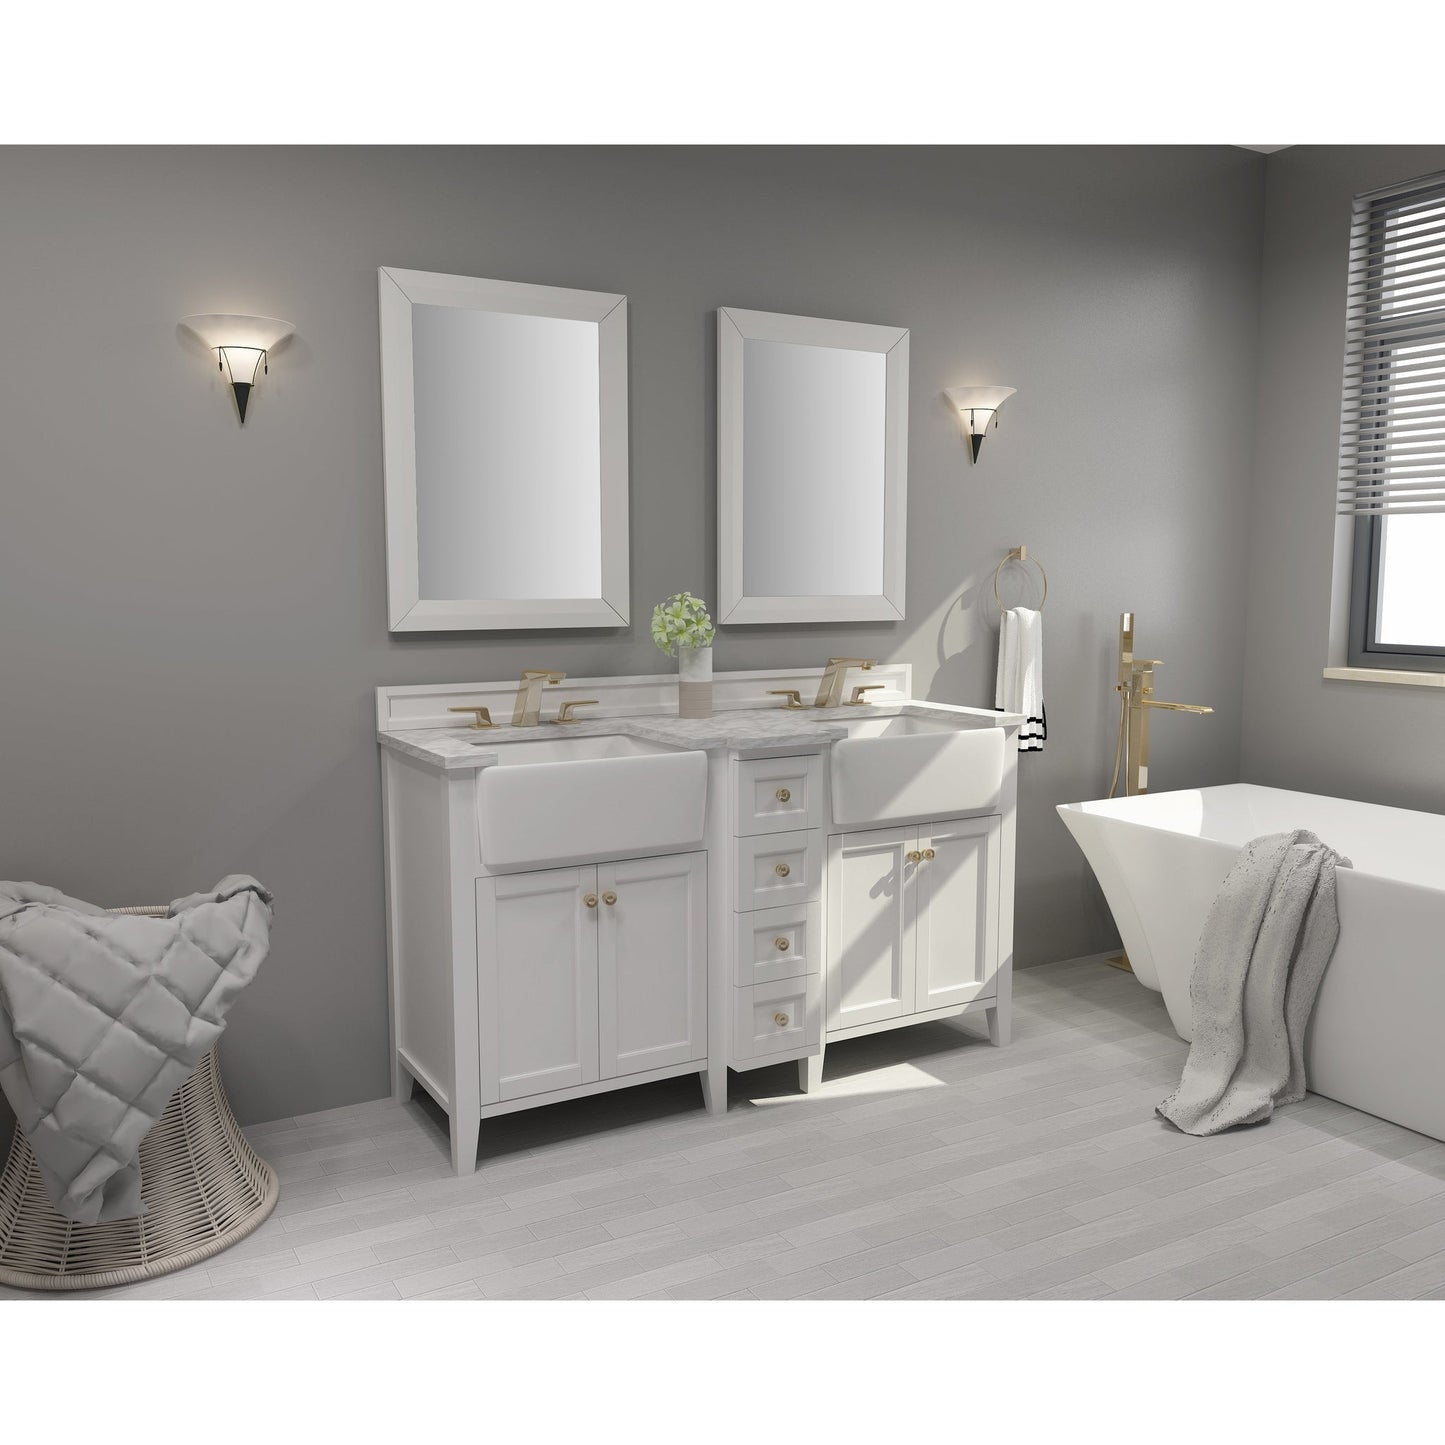 Ancerre Designs Adeline 60" White 4-Door 4-Drawer Bathroom Vanity With White Marble Vanity Top, White Farmhouse Double Ceramic Sinks, 4" Solid Wood Backsplash and Satin Brushed Gold Hardware